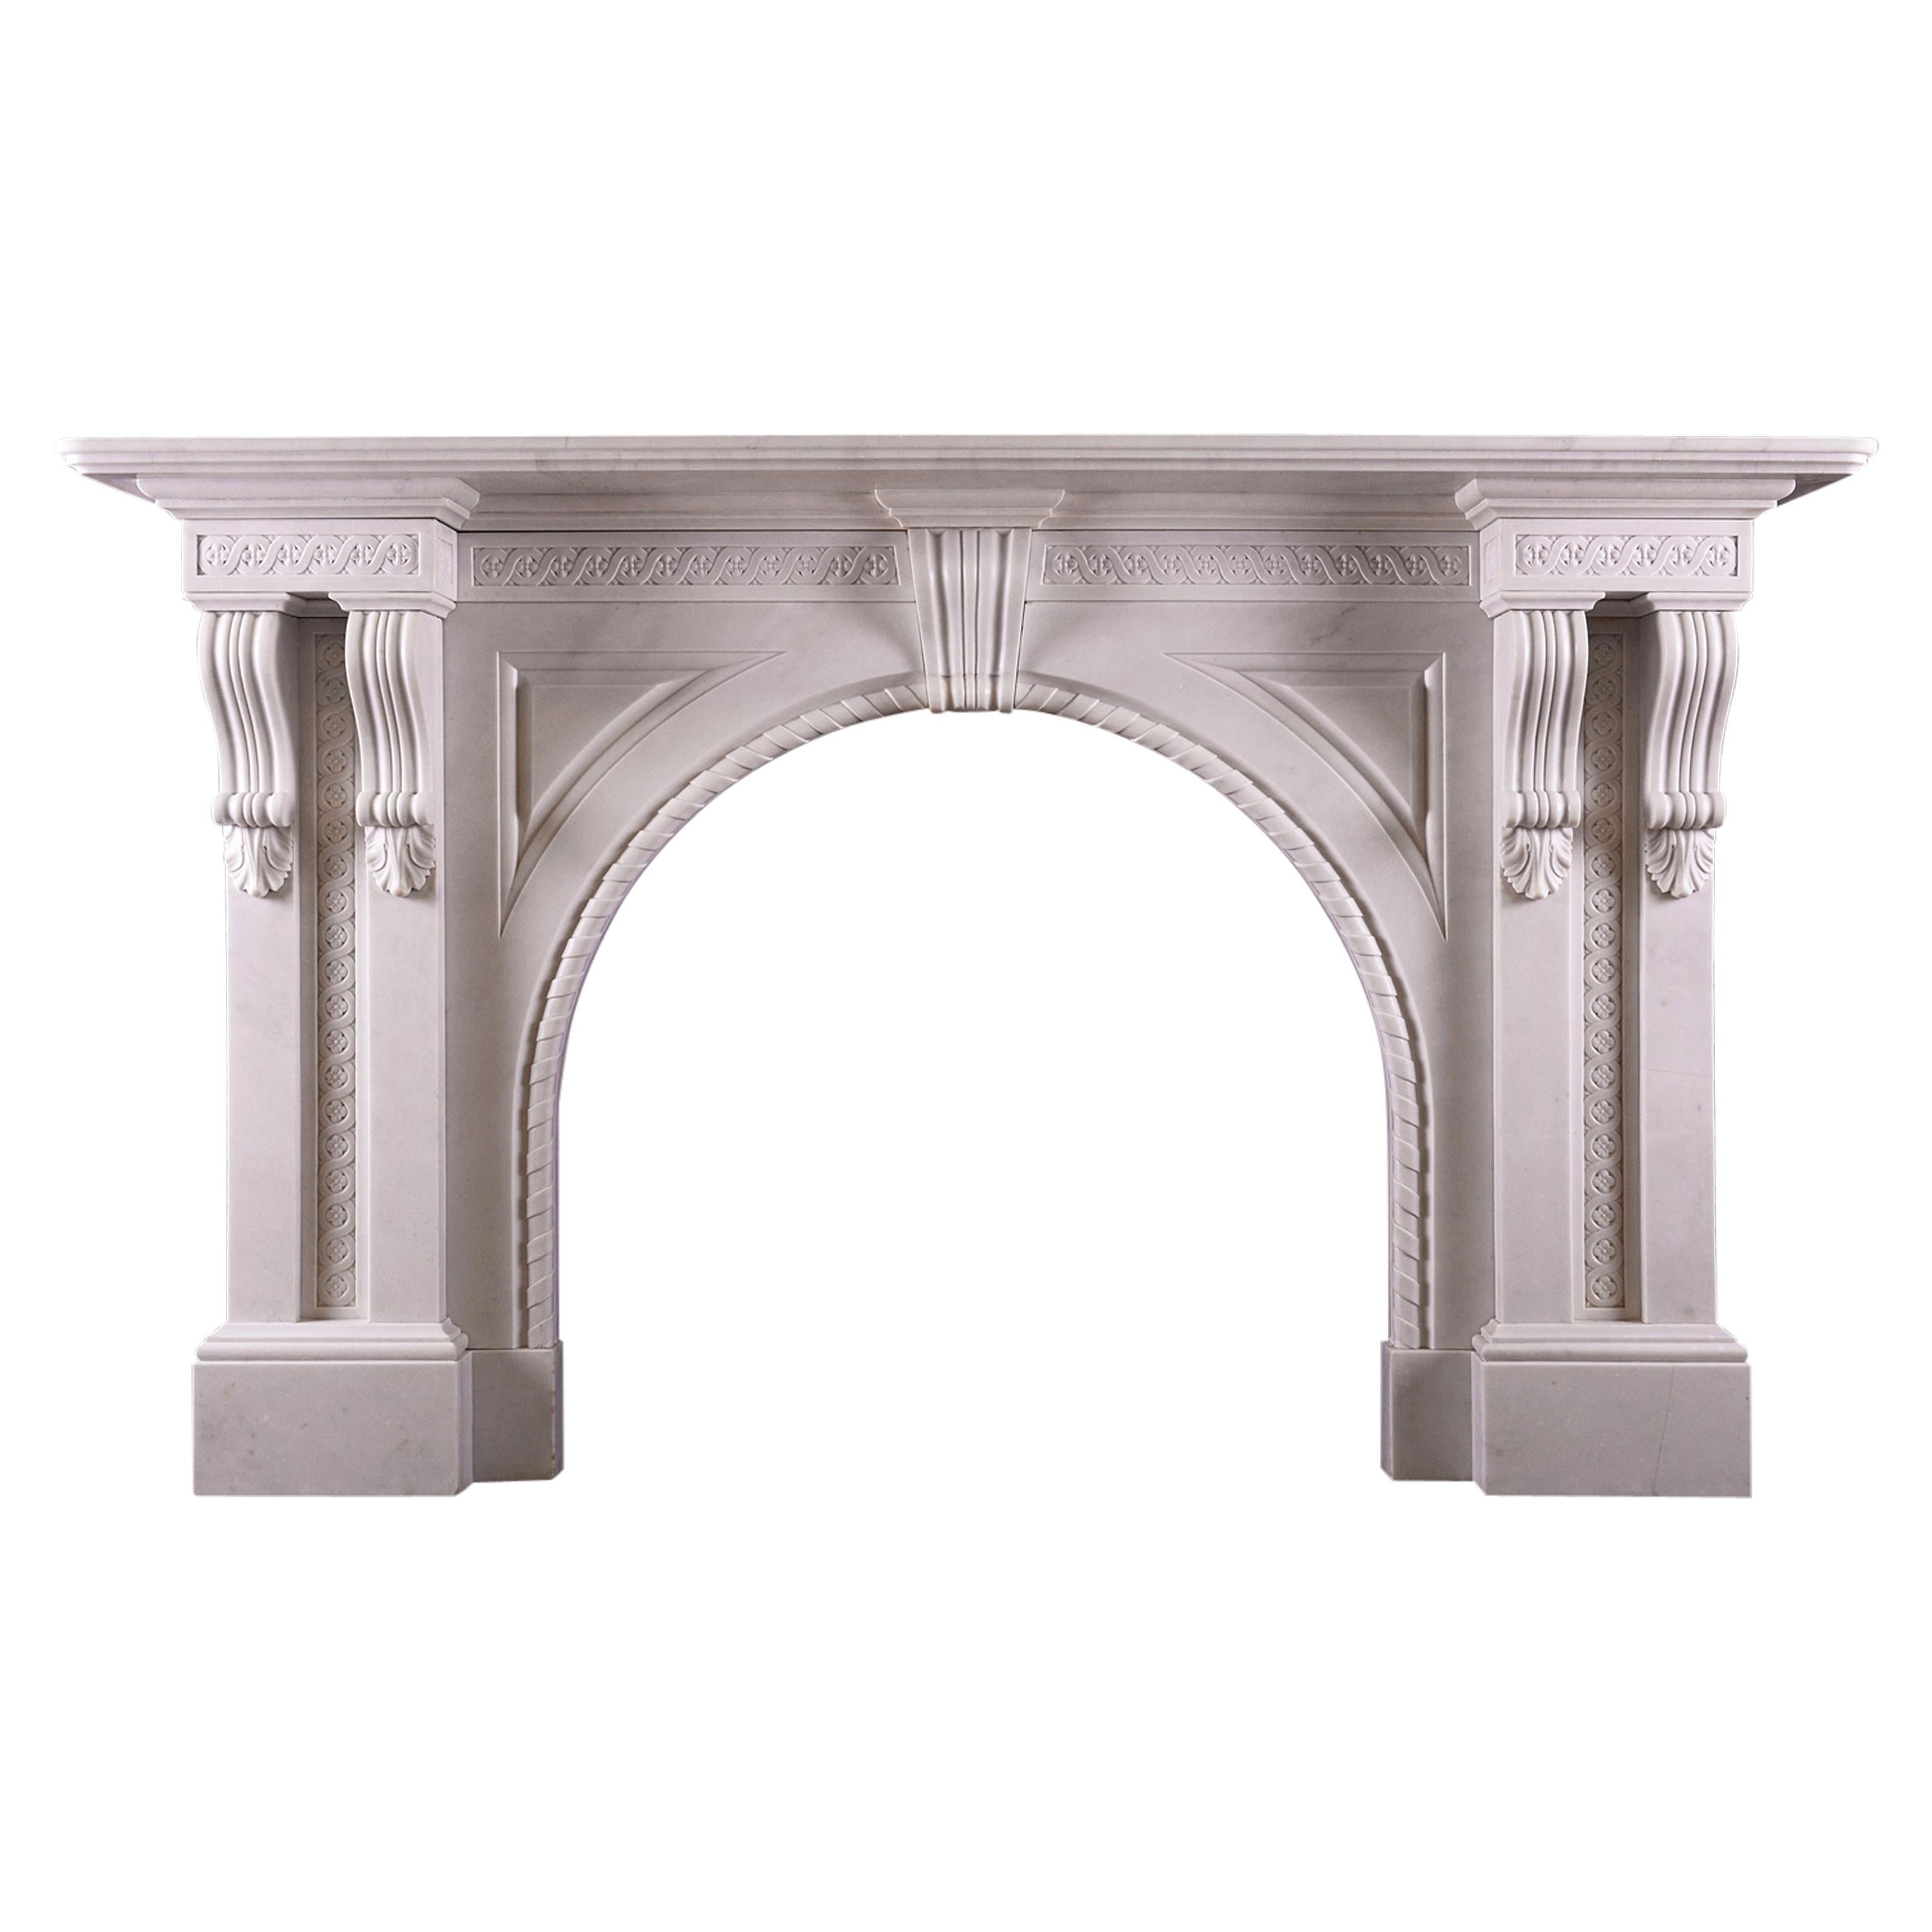 Quality Period Victorian Fireplace in Italian Statuary Marble